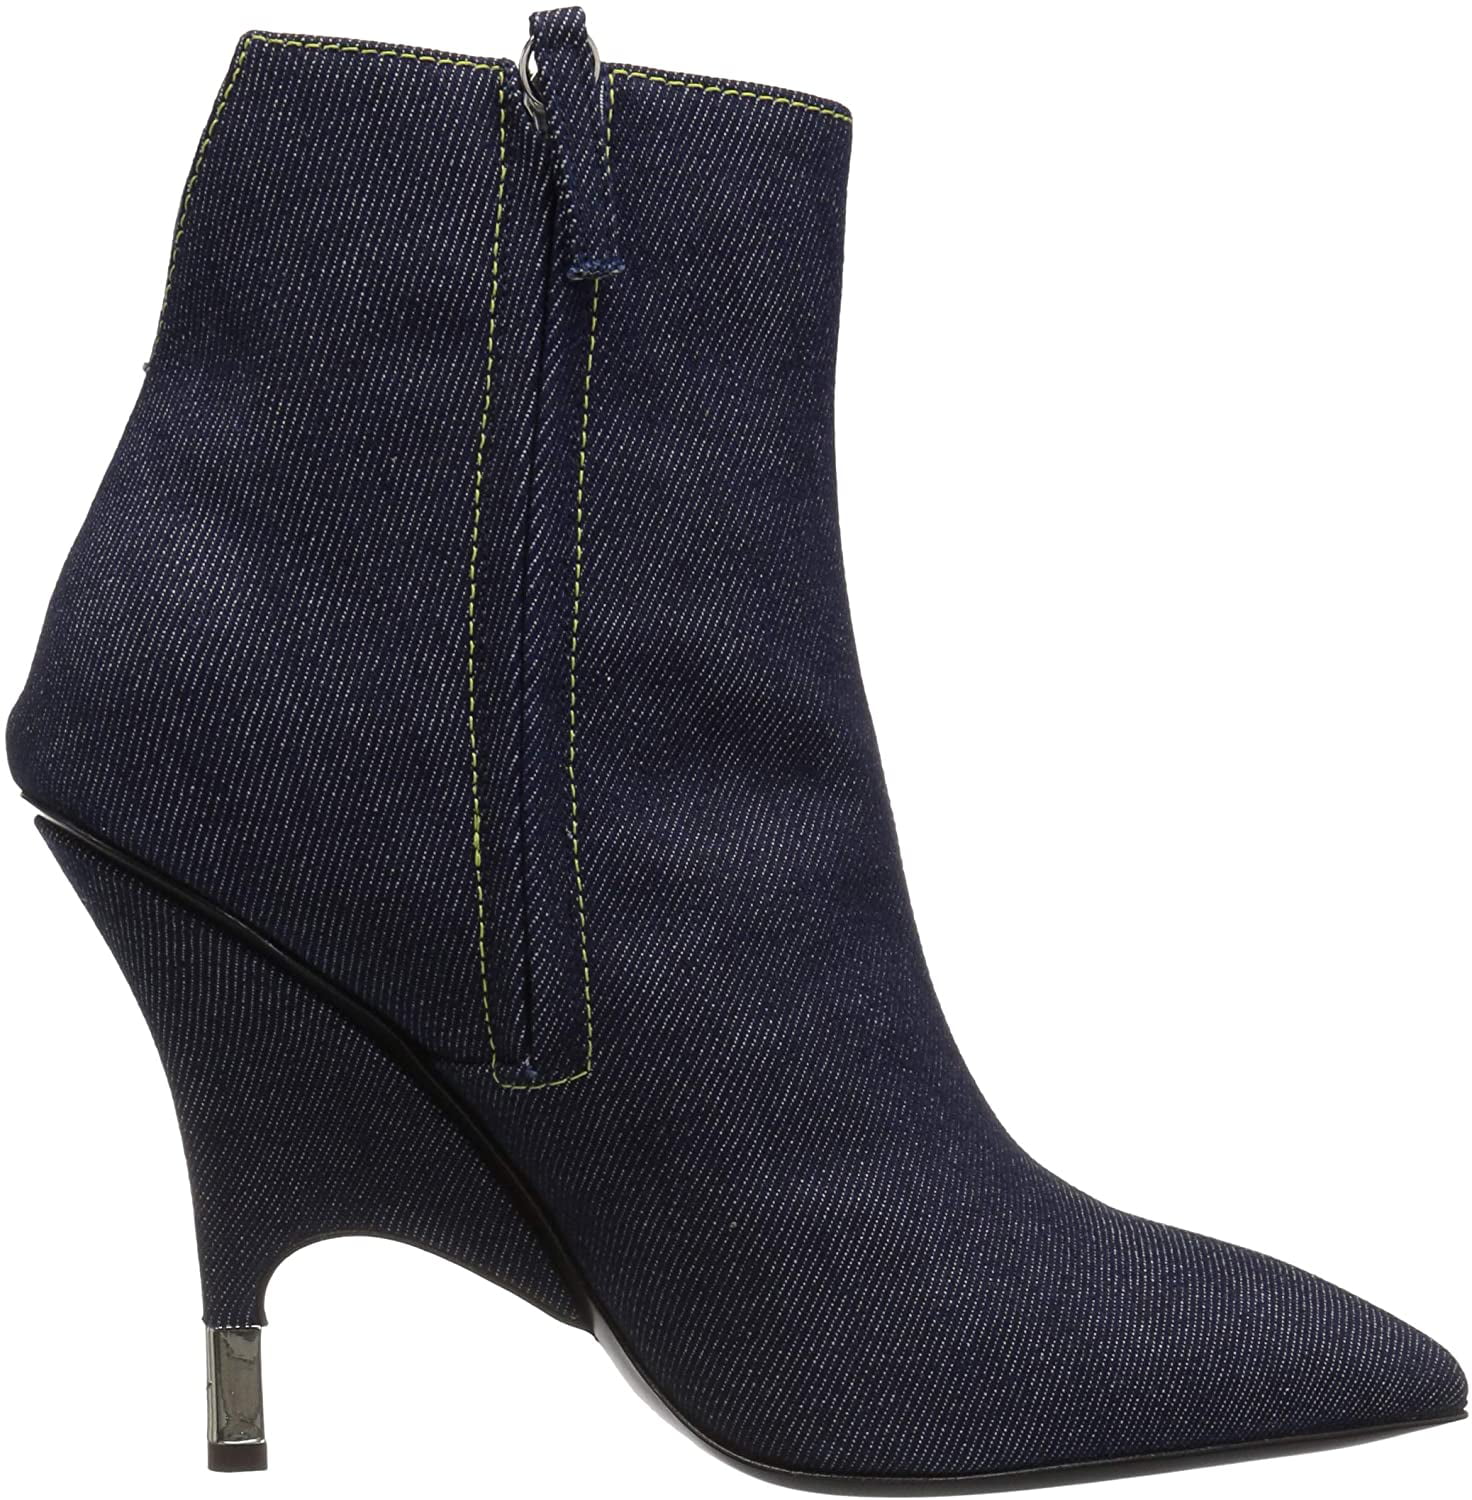 Details about   Giuseppe Zanotti Women's I870075 Ankle Boot  8 Blue 